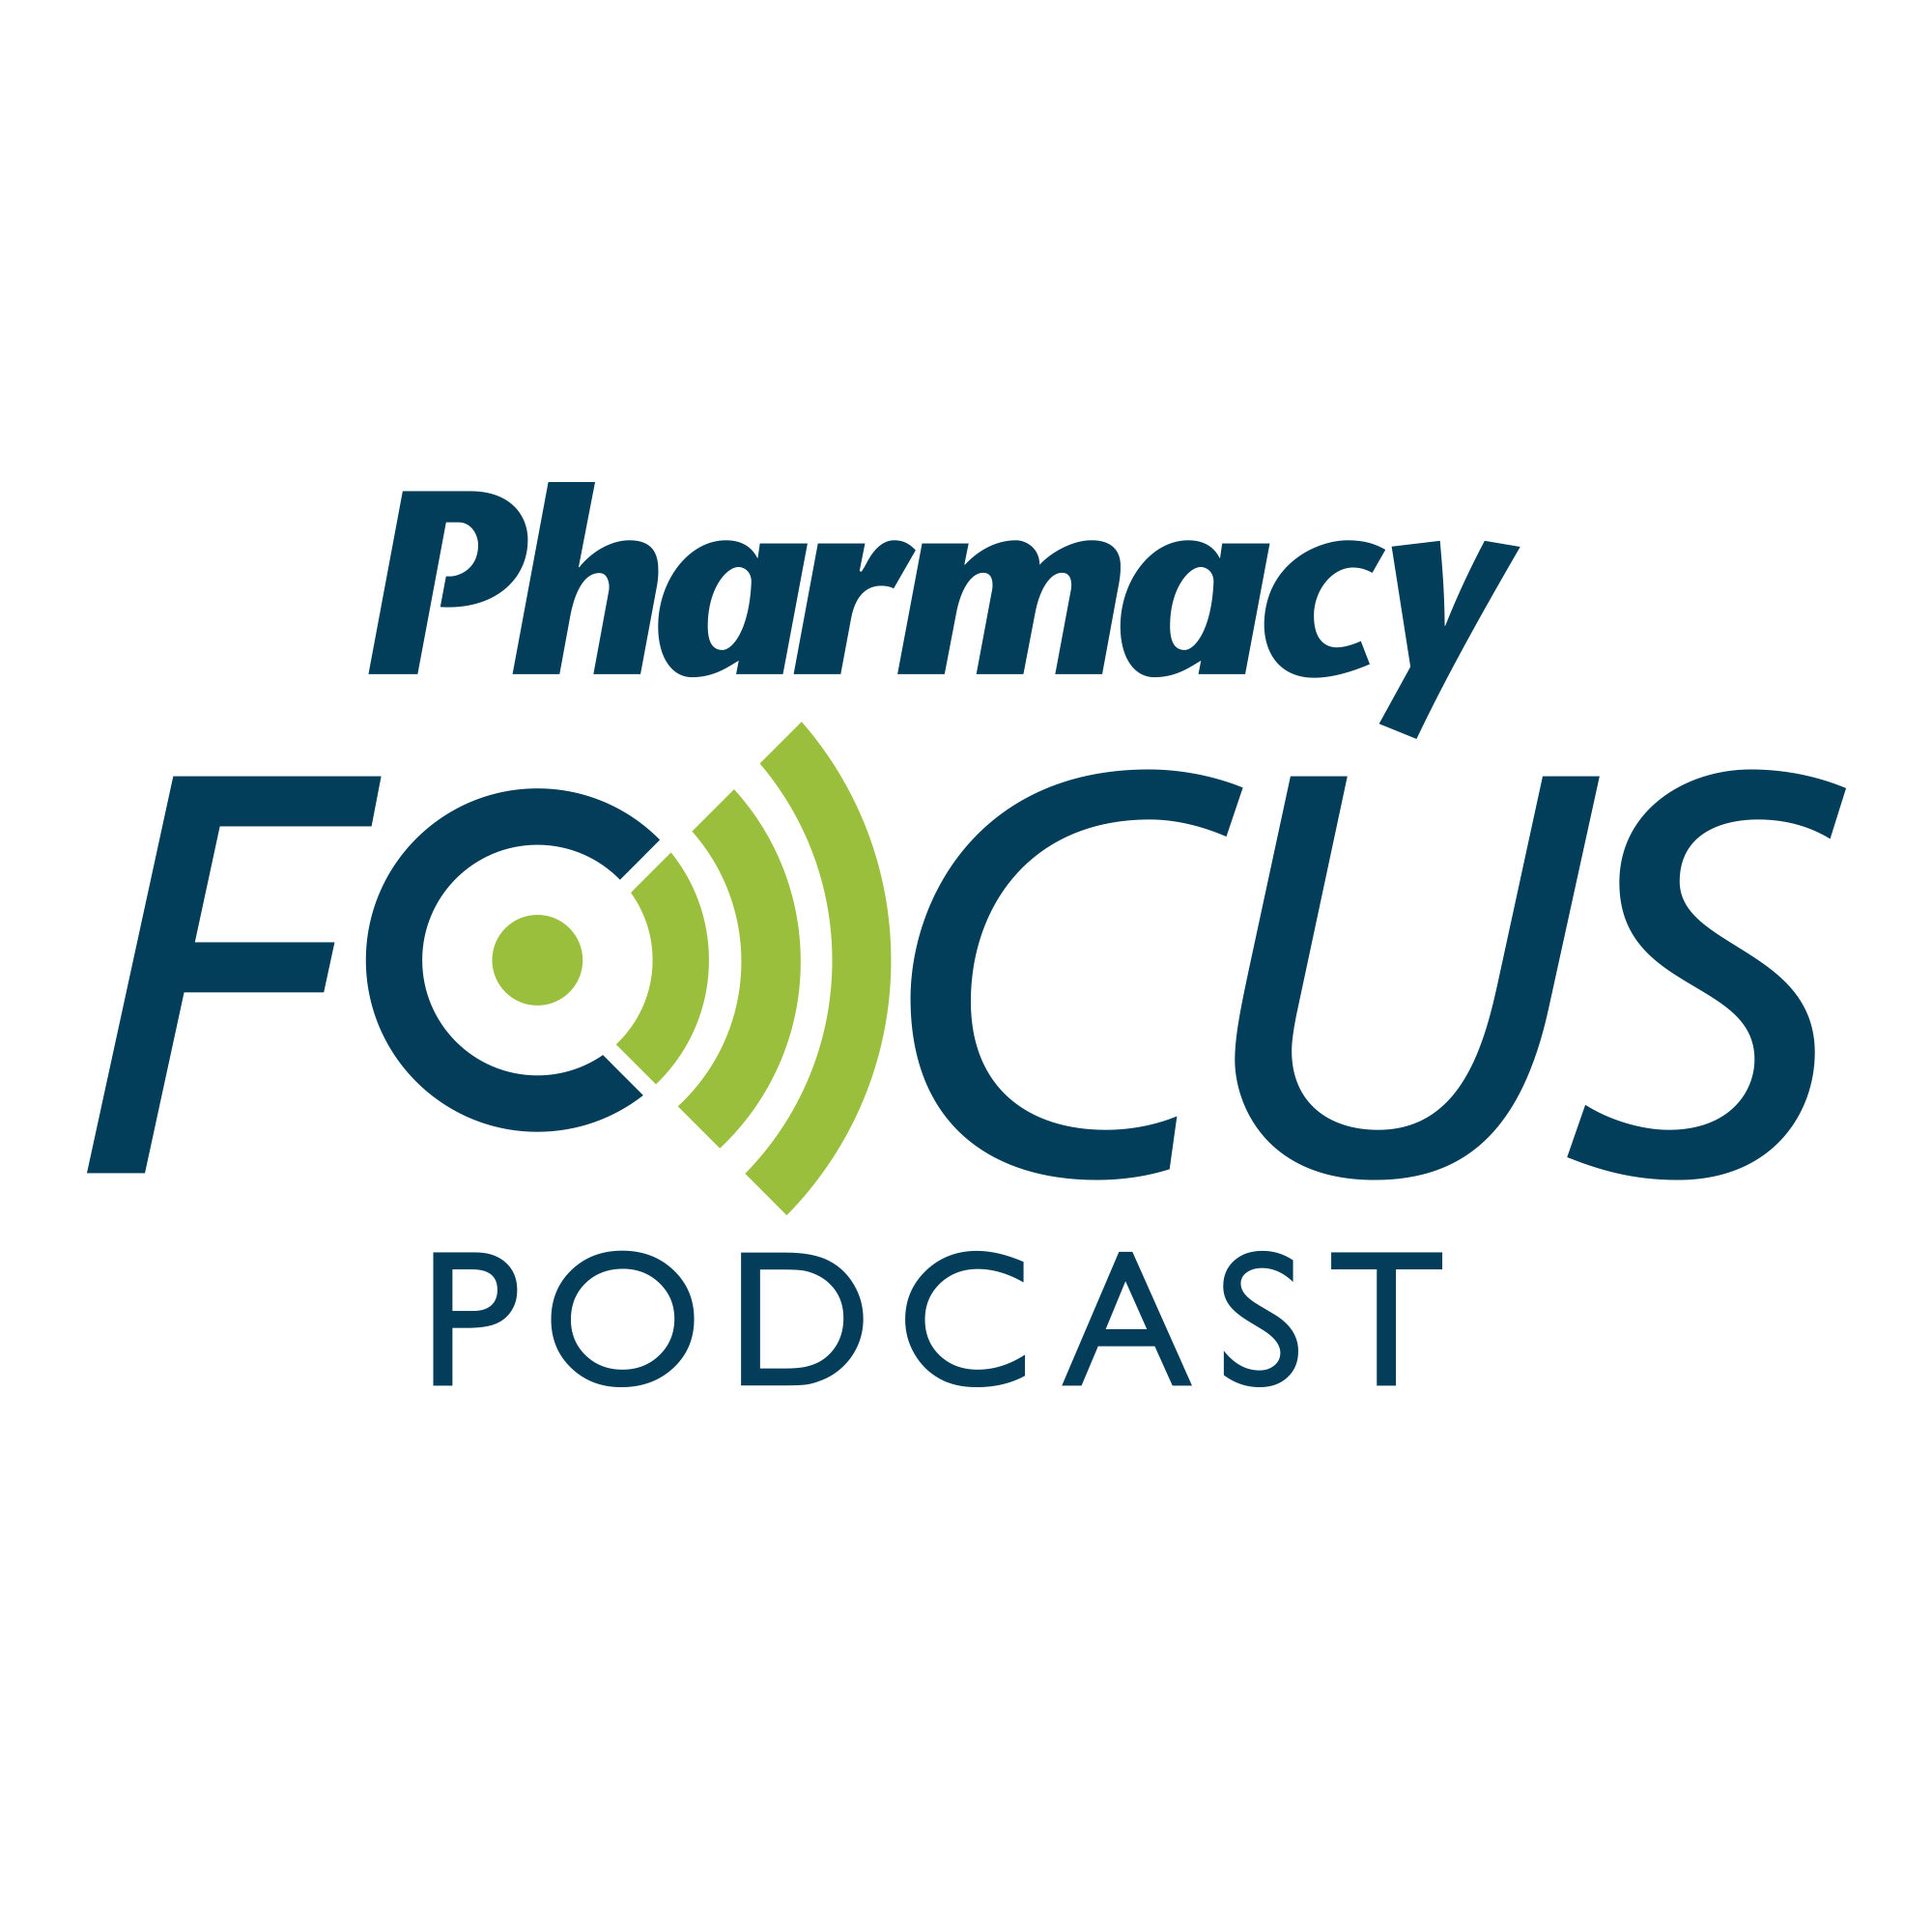 Pharmacy Focus Episode 14: The Neurological Impact of COVID-19